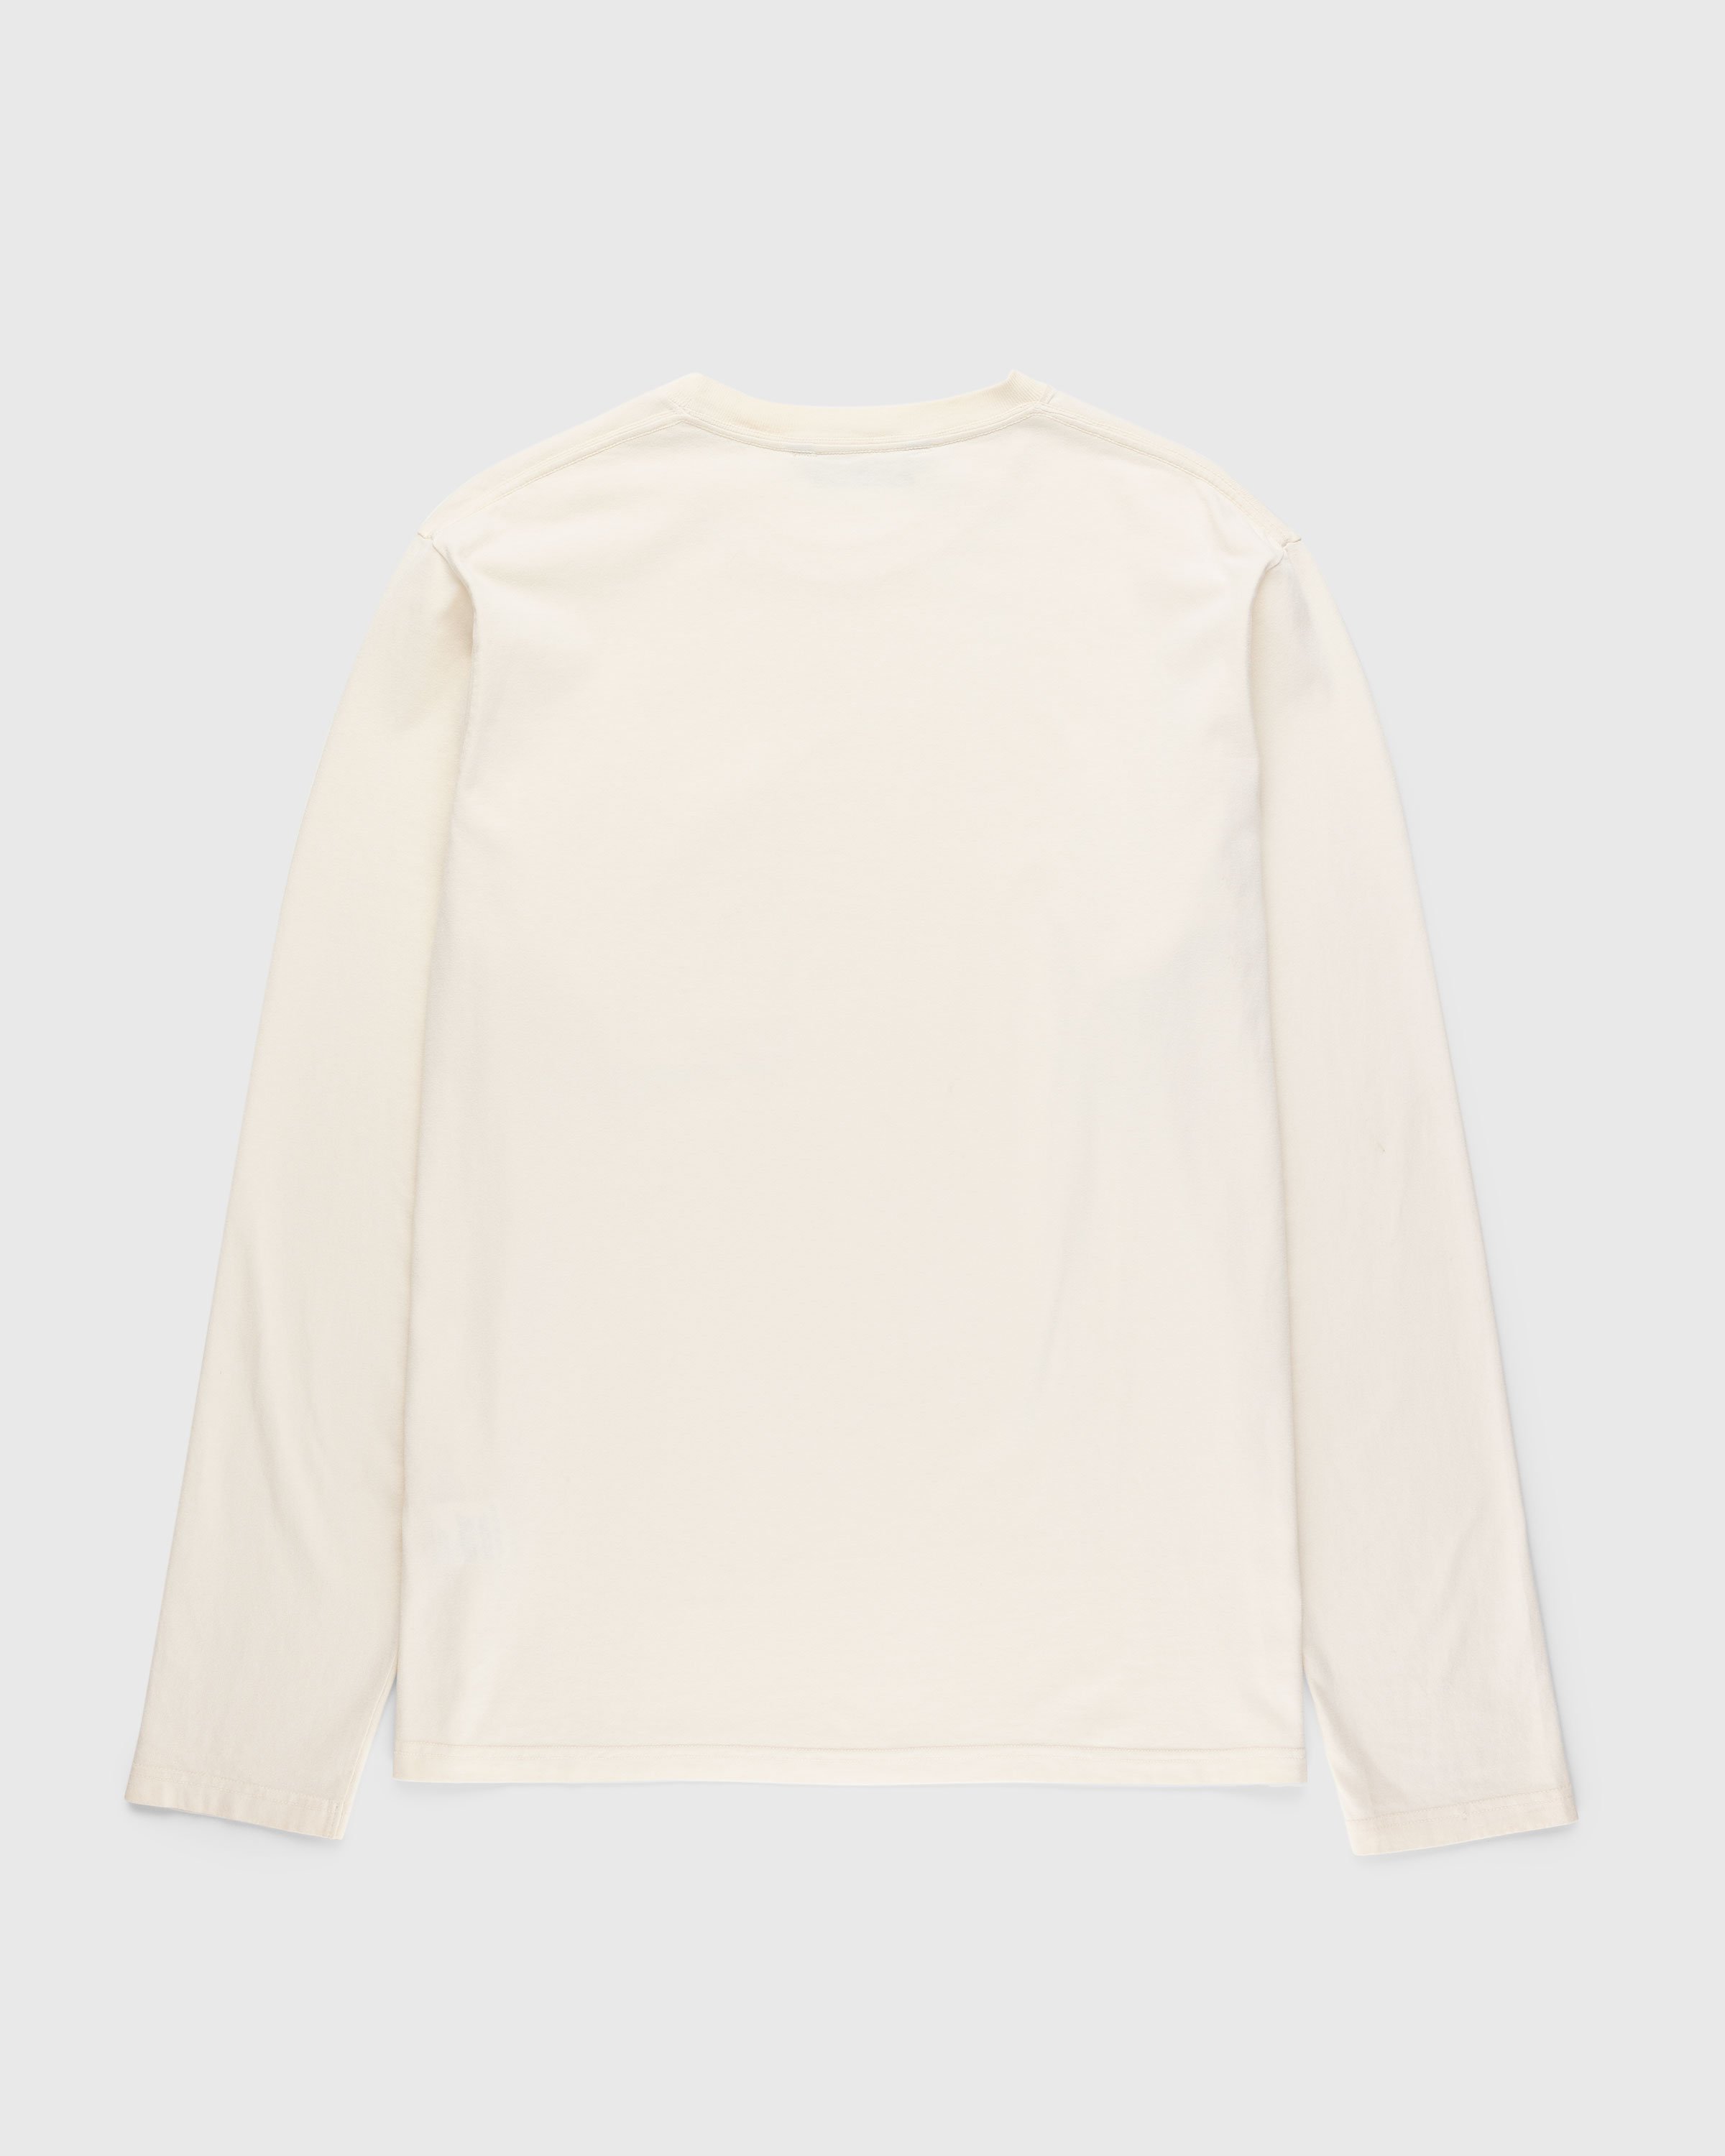 Highsnobiety HS05 - Pigment Dyed Boxy Long Sleeves Jersey Natural - Clothing - Beige - Image 2